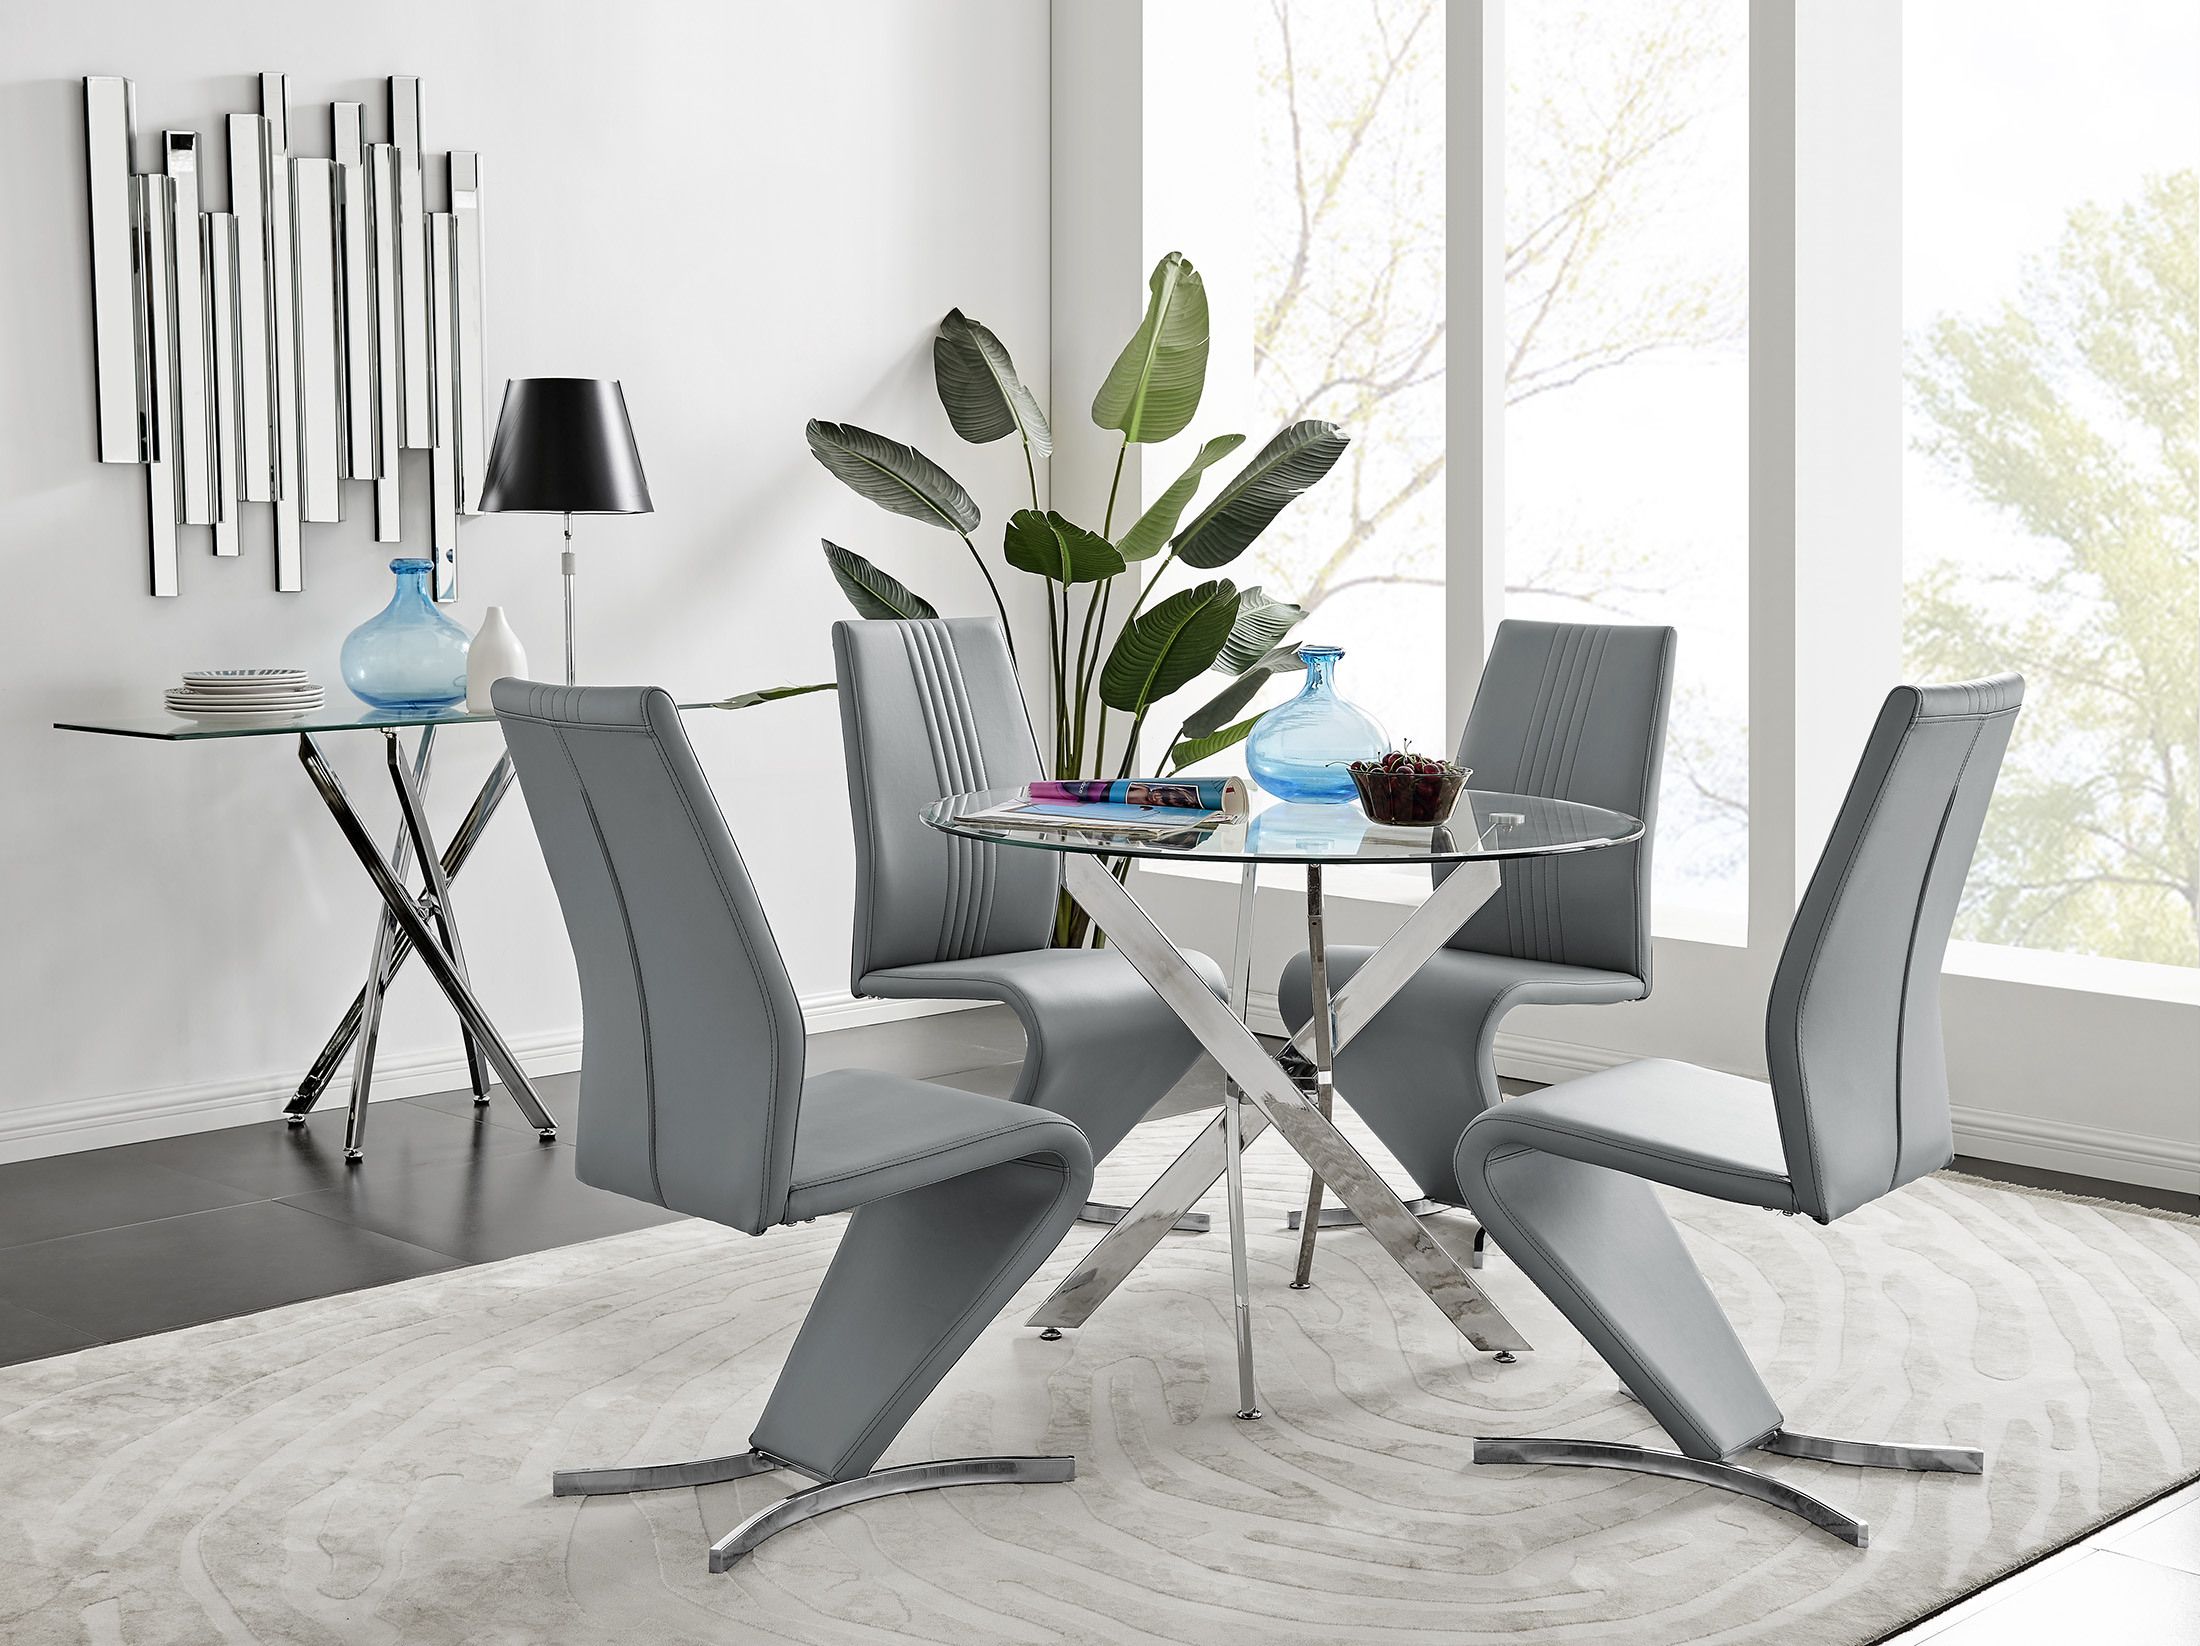 Novara Chrome Metal Dining Table & 4 Willow Chairs For Widely Used Chrome Metal Dining Tables (View 1 of 20)